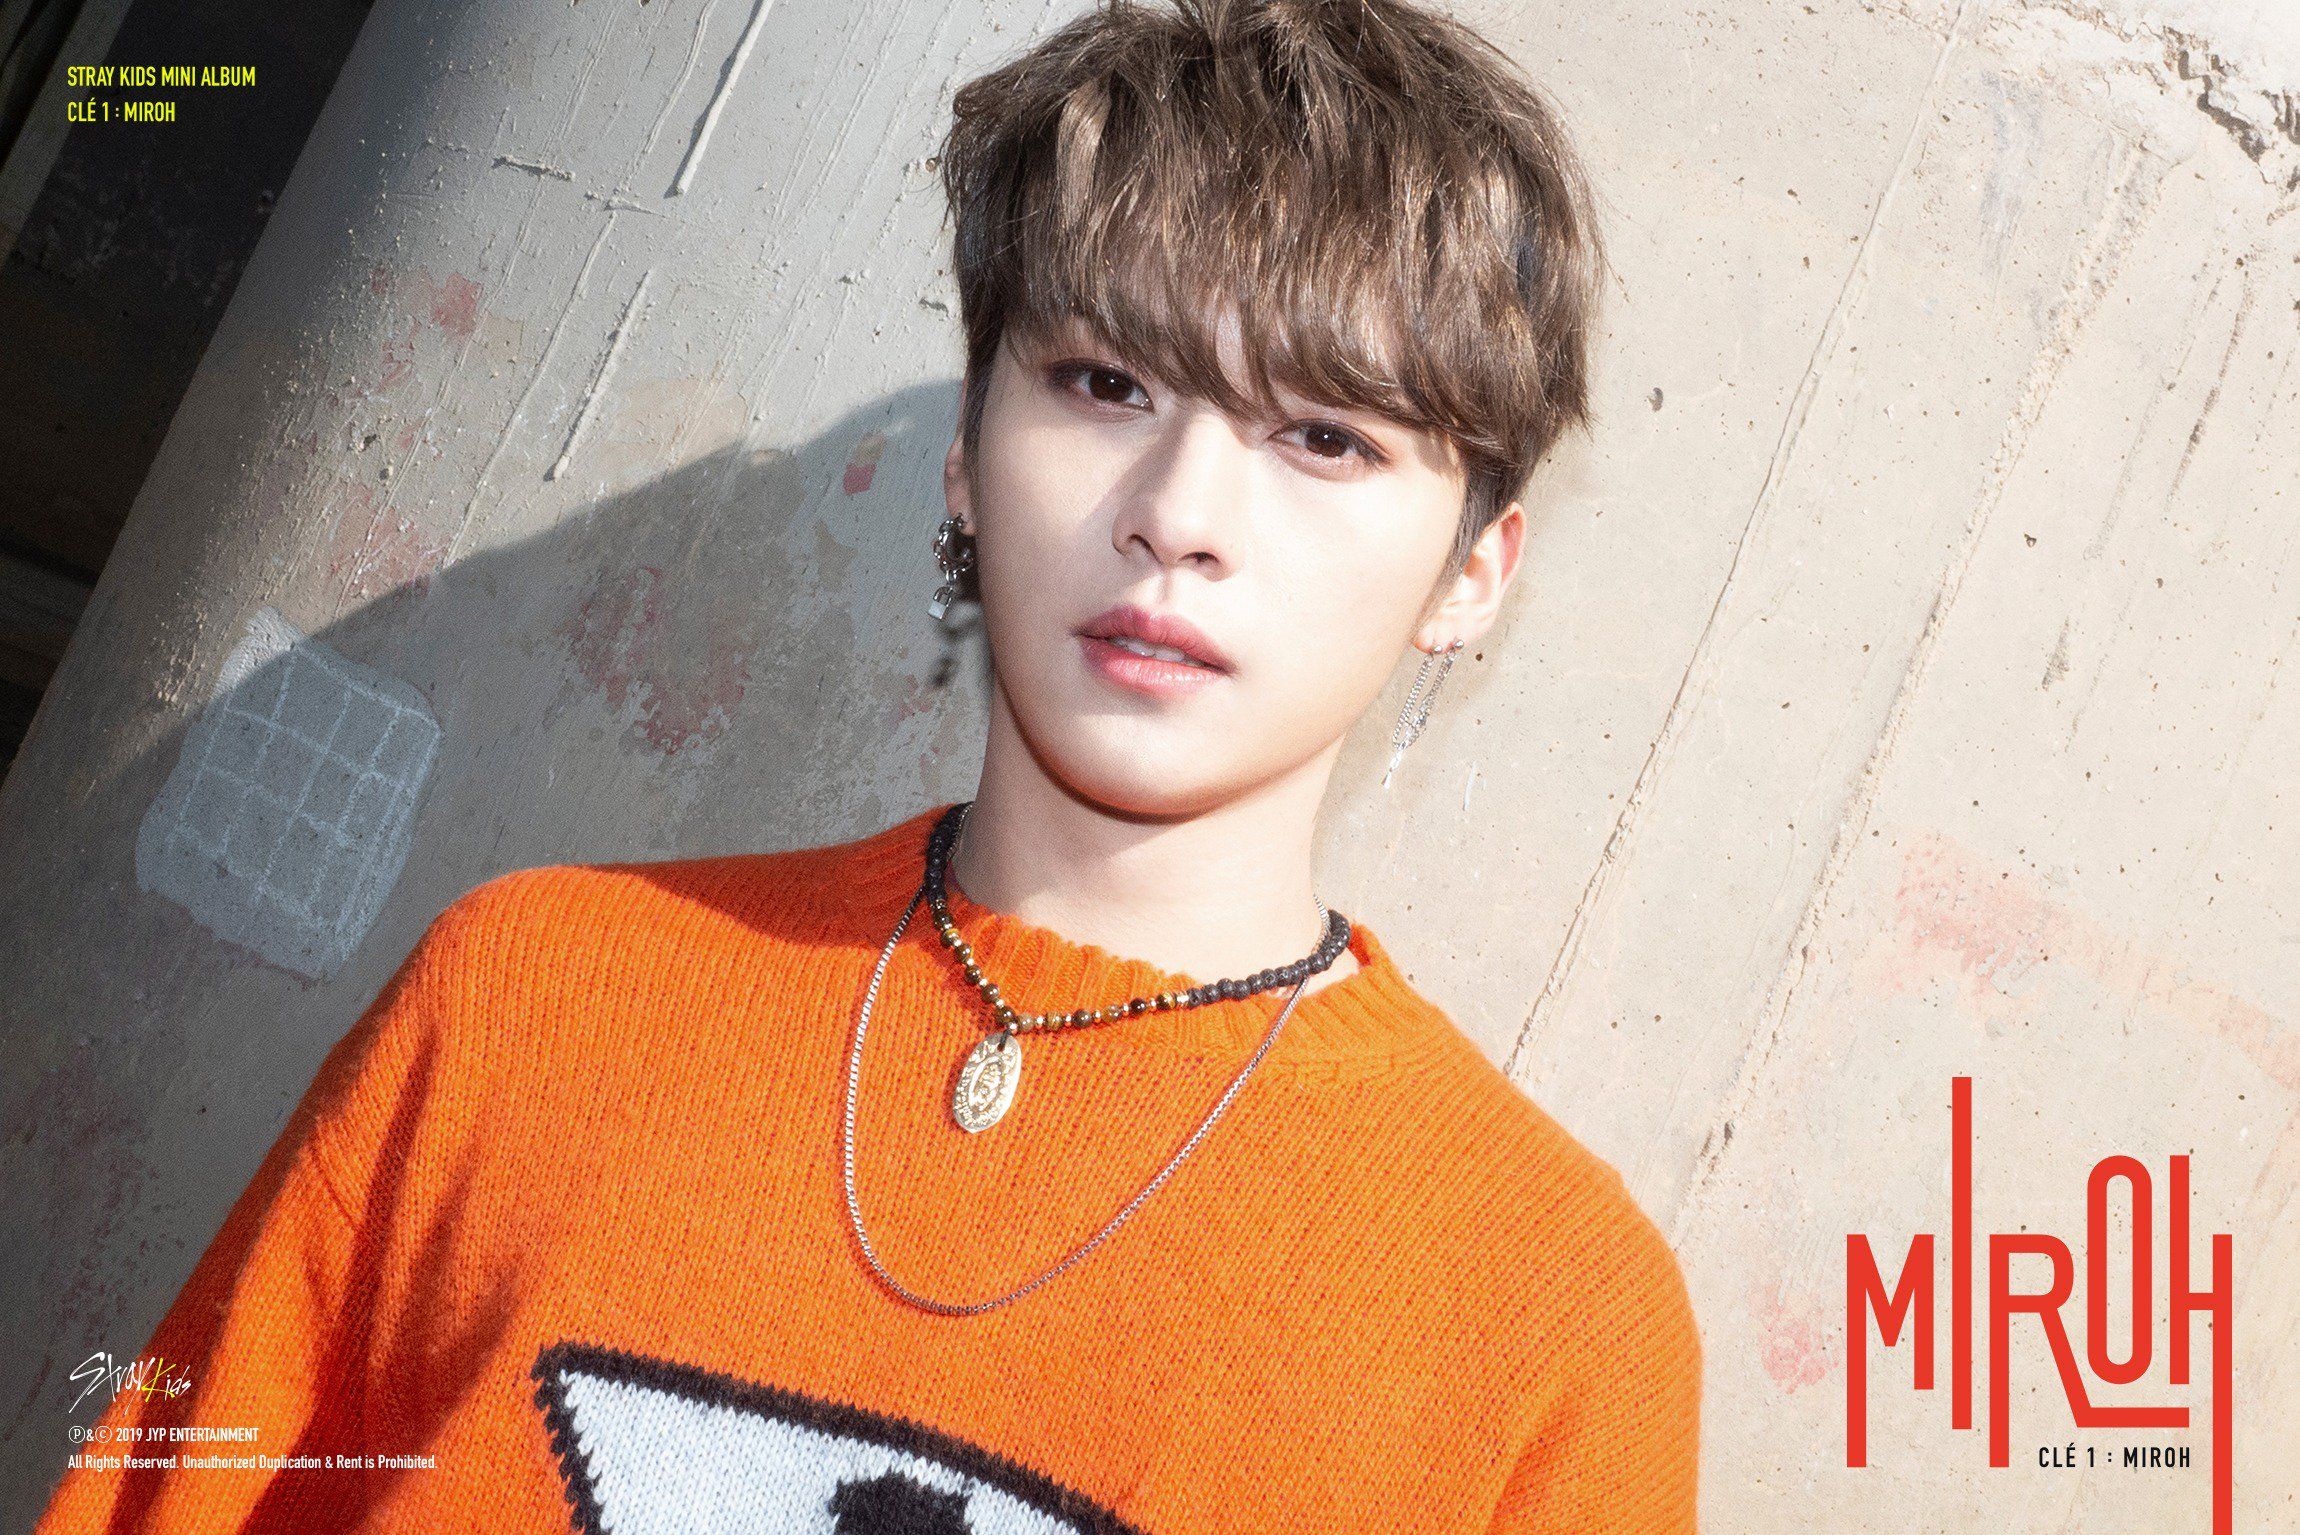 Stray Kidsé 1, MIROH Teaser Image: Lee Know